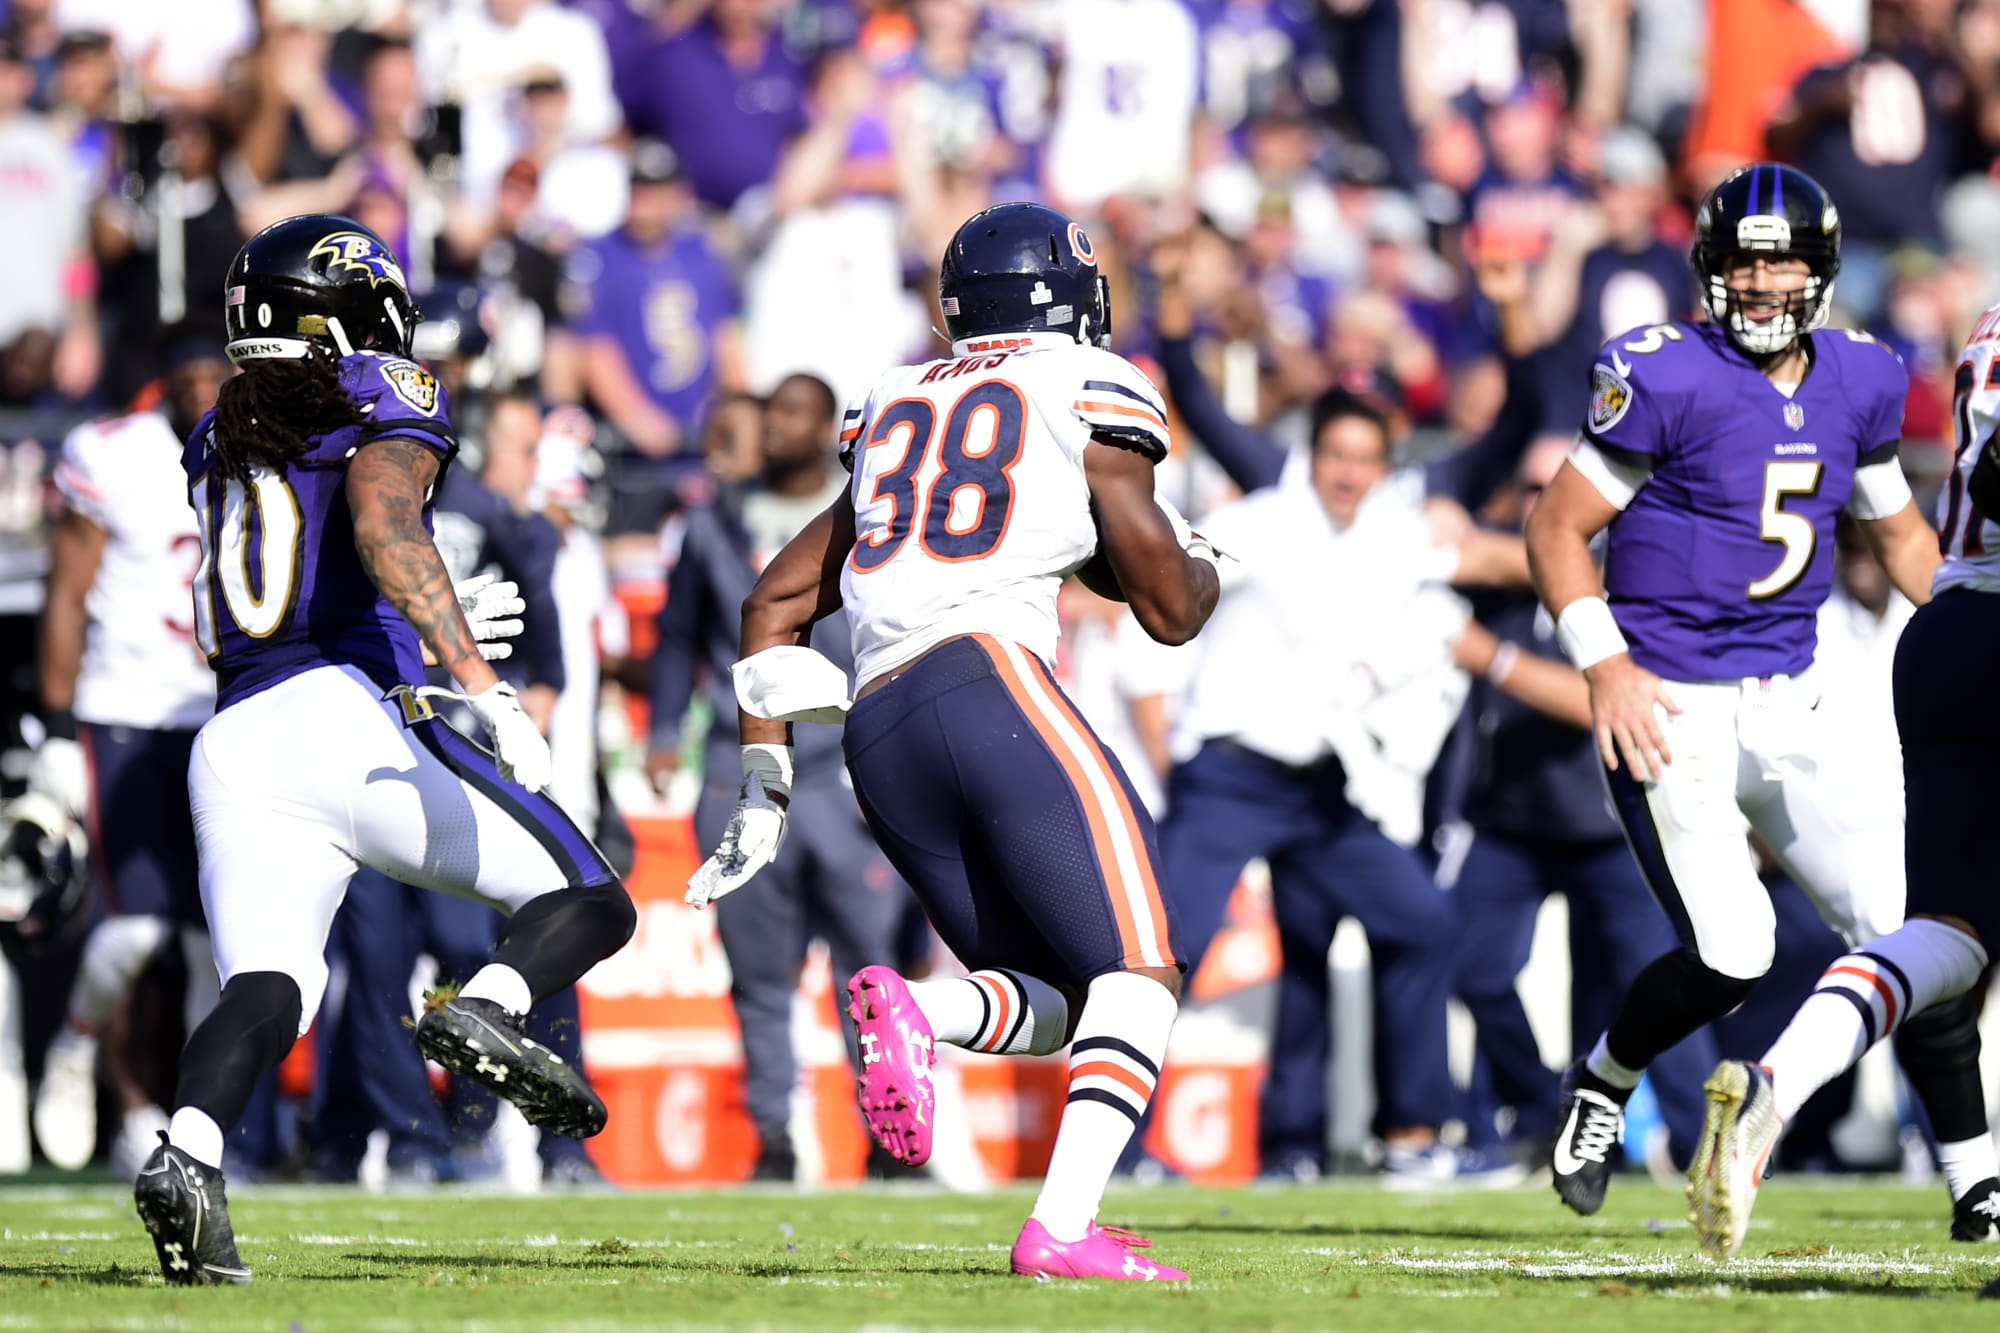 Bears vs. Ravens Highlights, game tracker and more